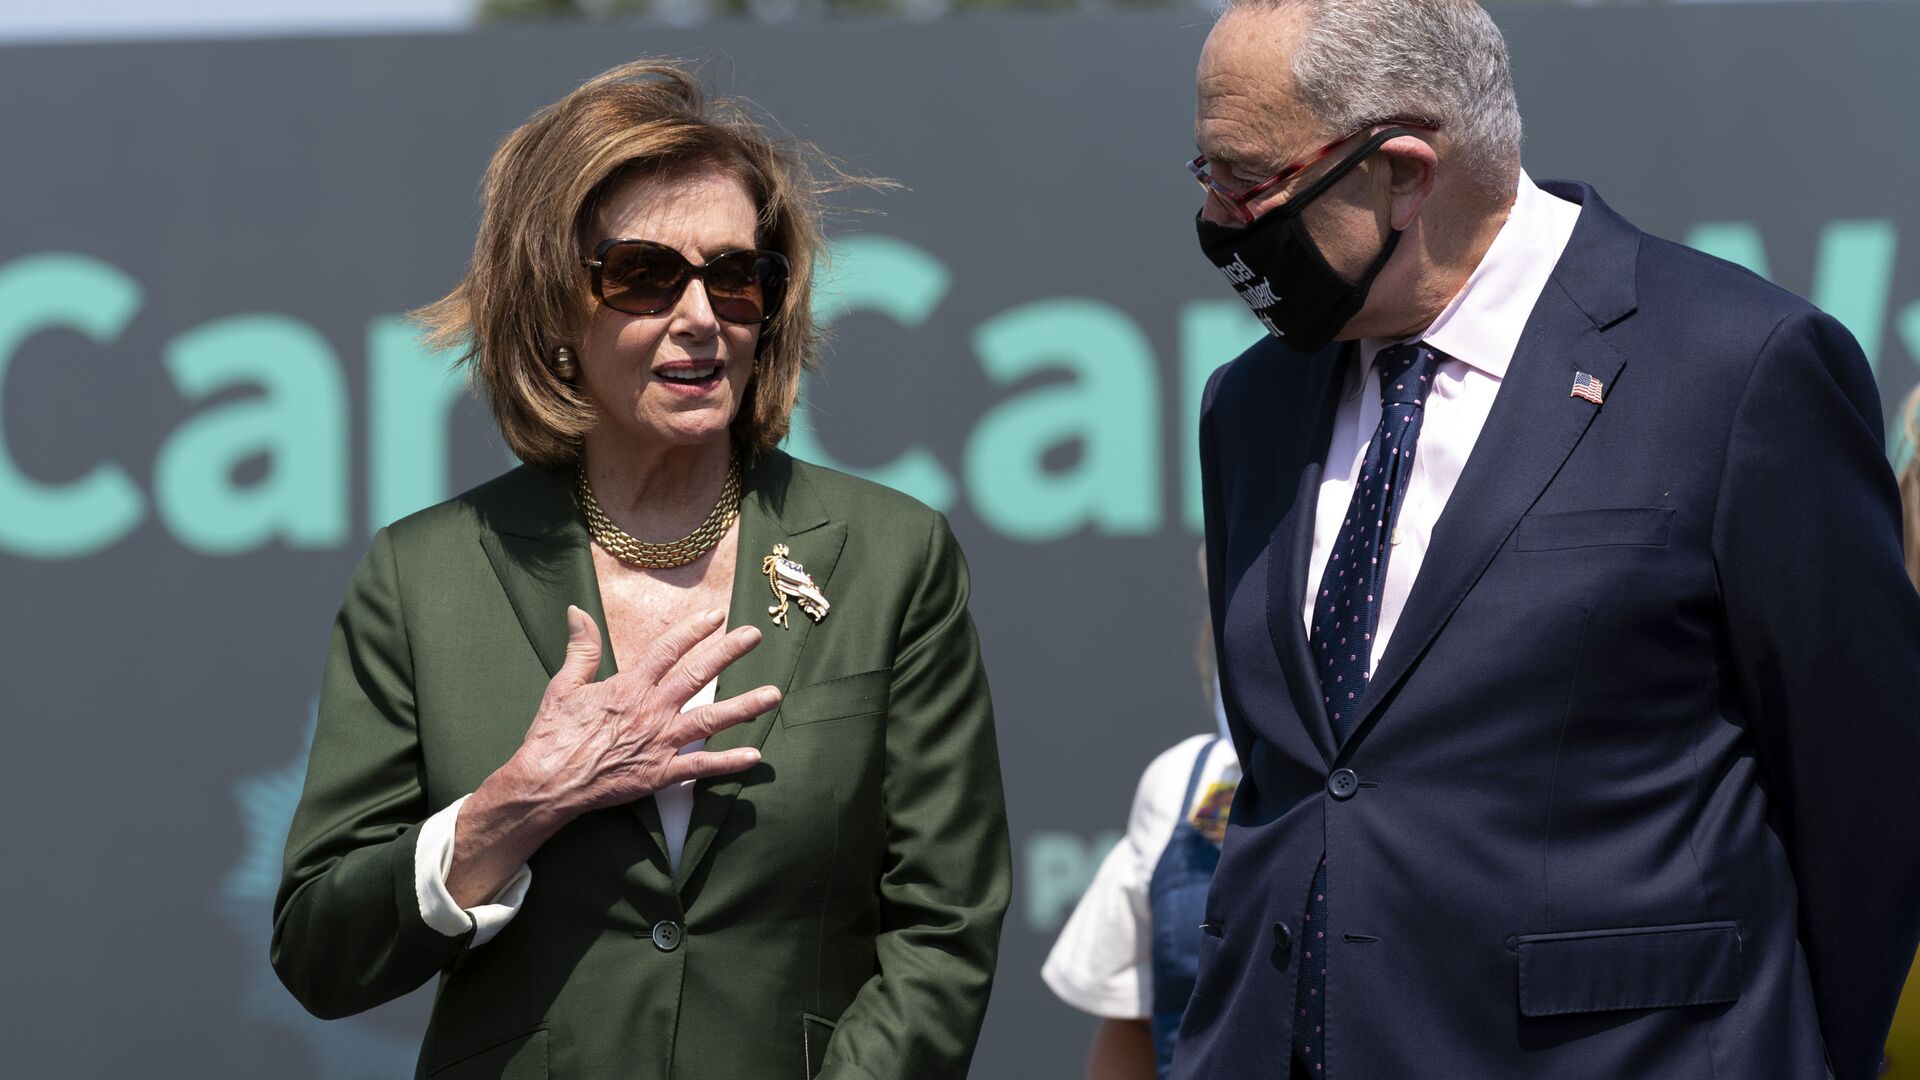 Speaker of the House Nancy Pelosi, D-Calif., speaks with Senate Majority Leader Chuck Schumer, D-N.Y., during Paid Leave for All rally on Capitol Hill in Washington, Wednesday, Aug. 4, 2021. - Sputnik International, 1920, 02.09.2021